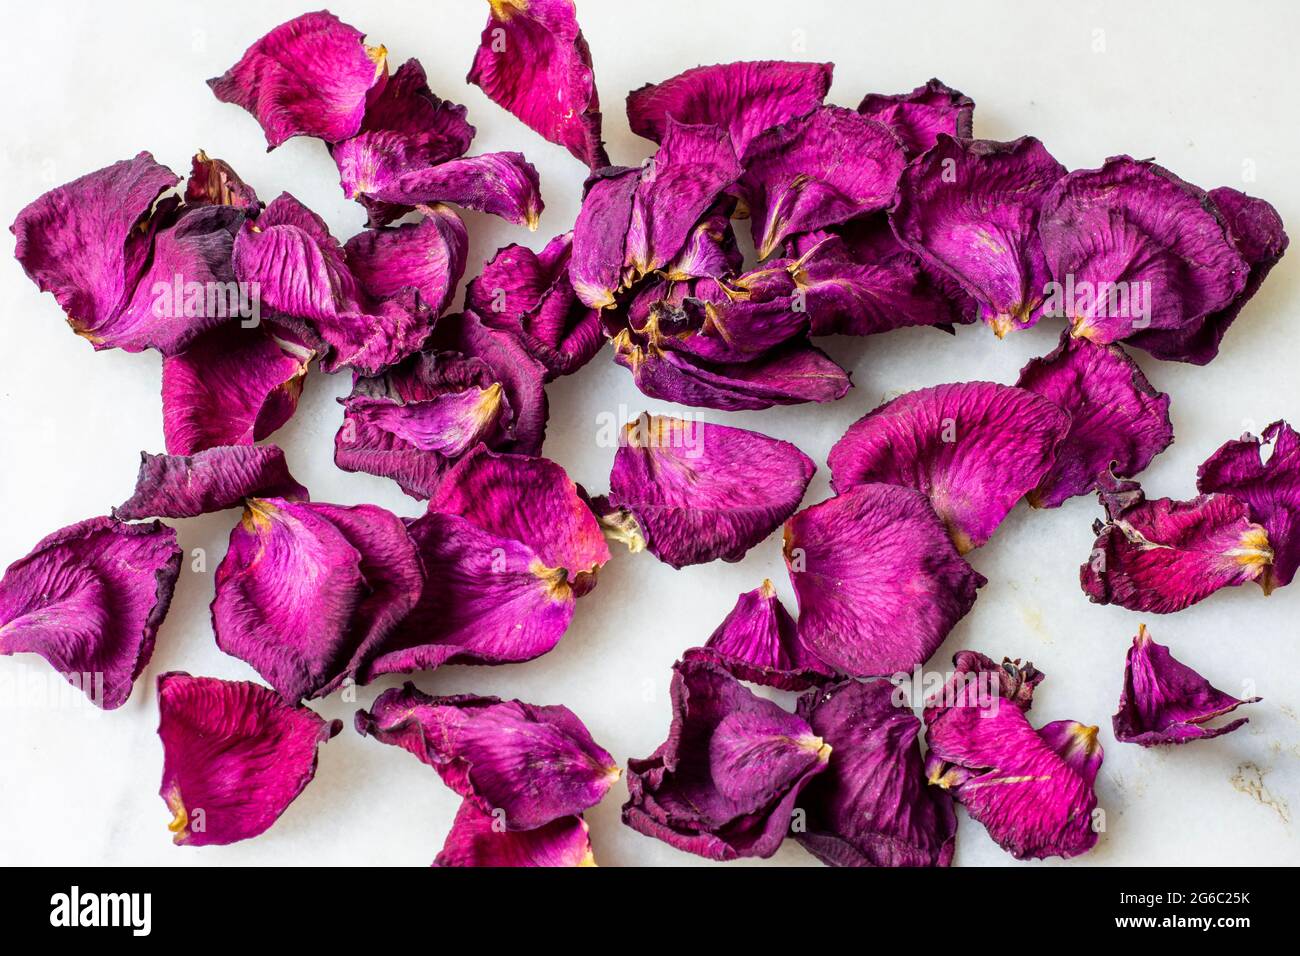 Top view of dried rose petals on marble background. Stock Photo